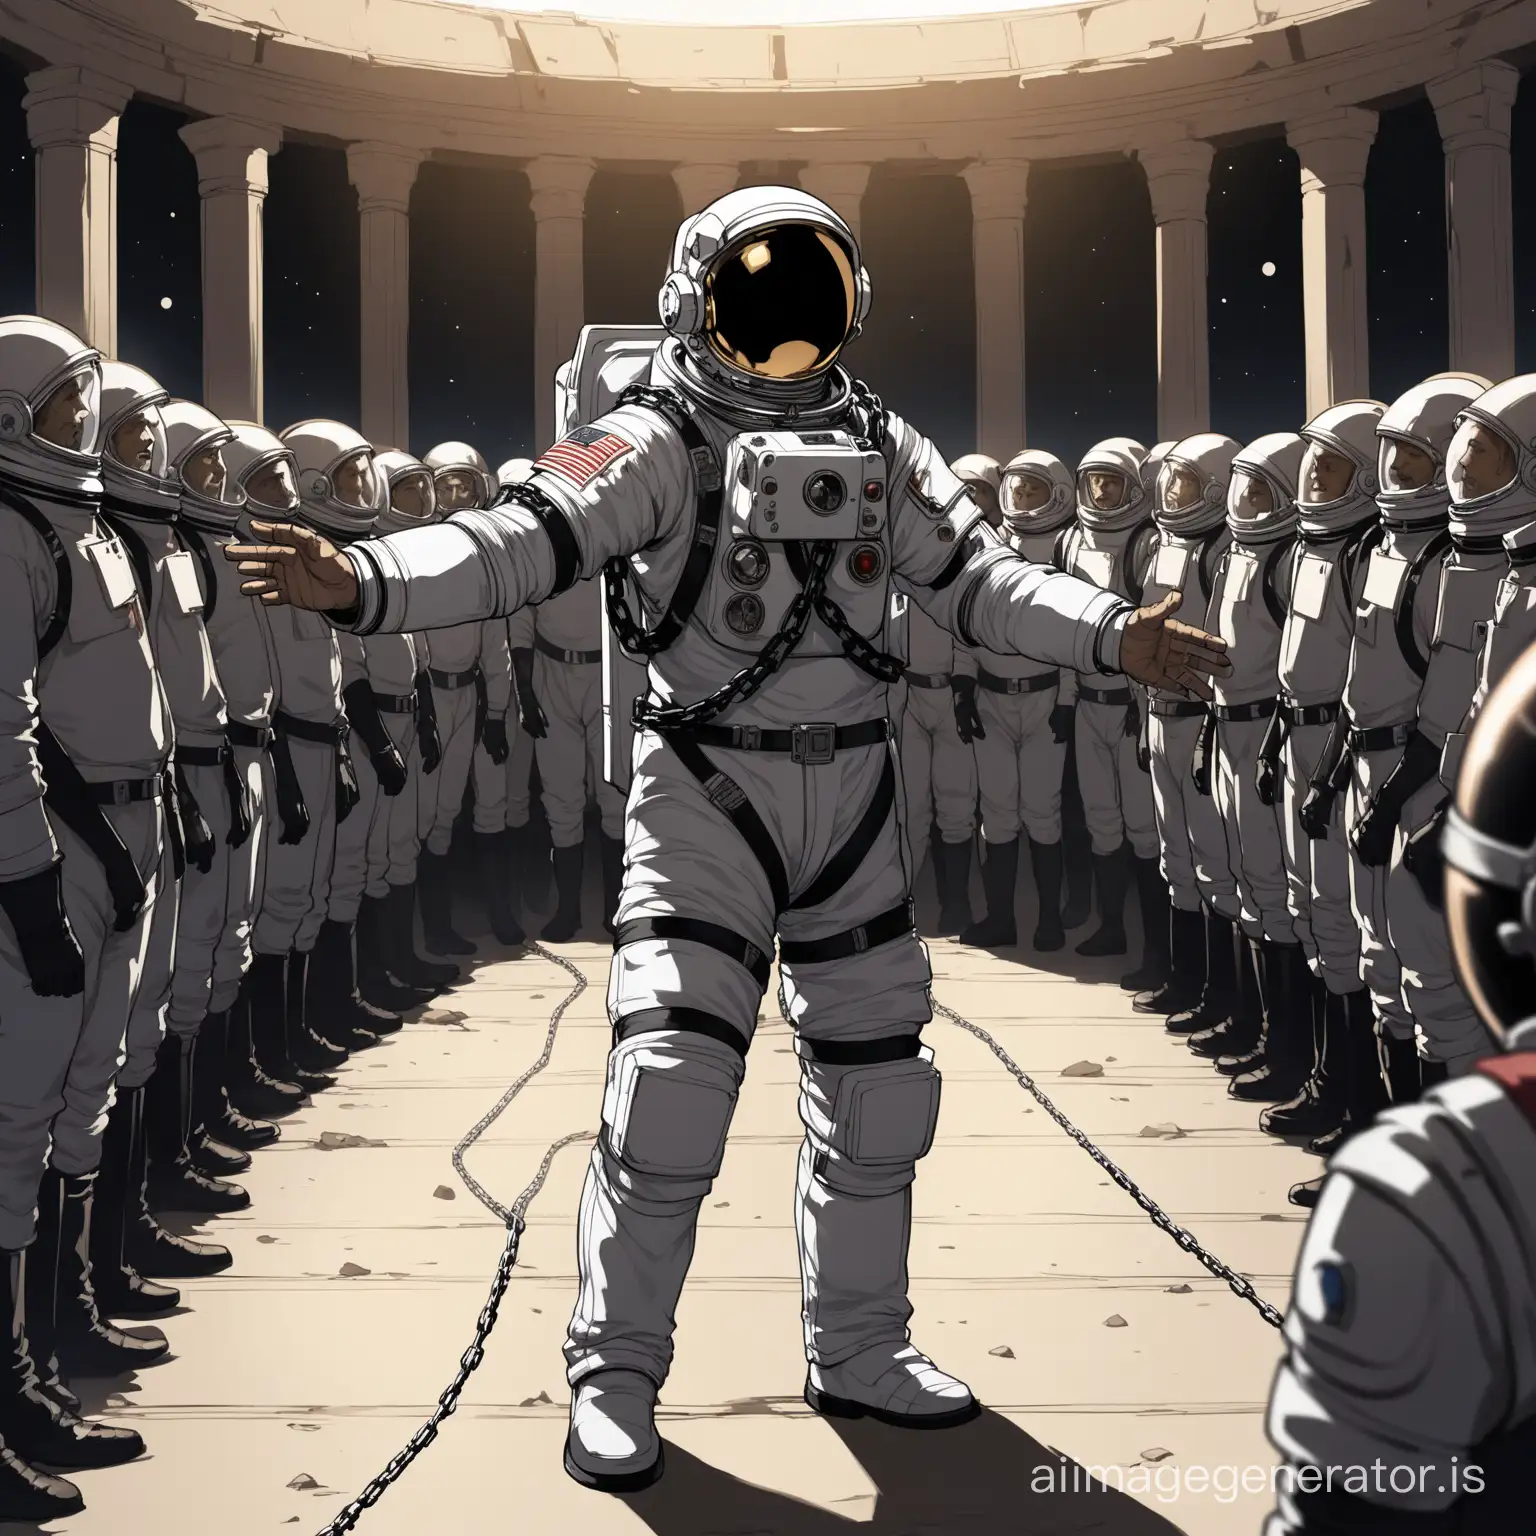 Domineering-Astronaut-Commanding-Enslaved-Population-in-a-Futuristic-Space-Setting